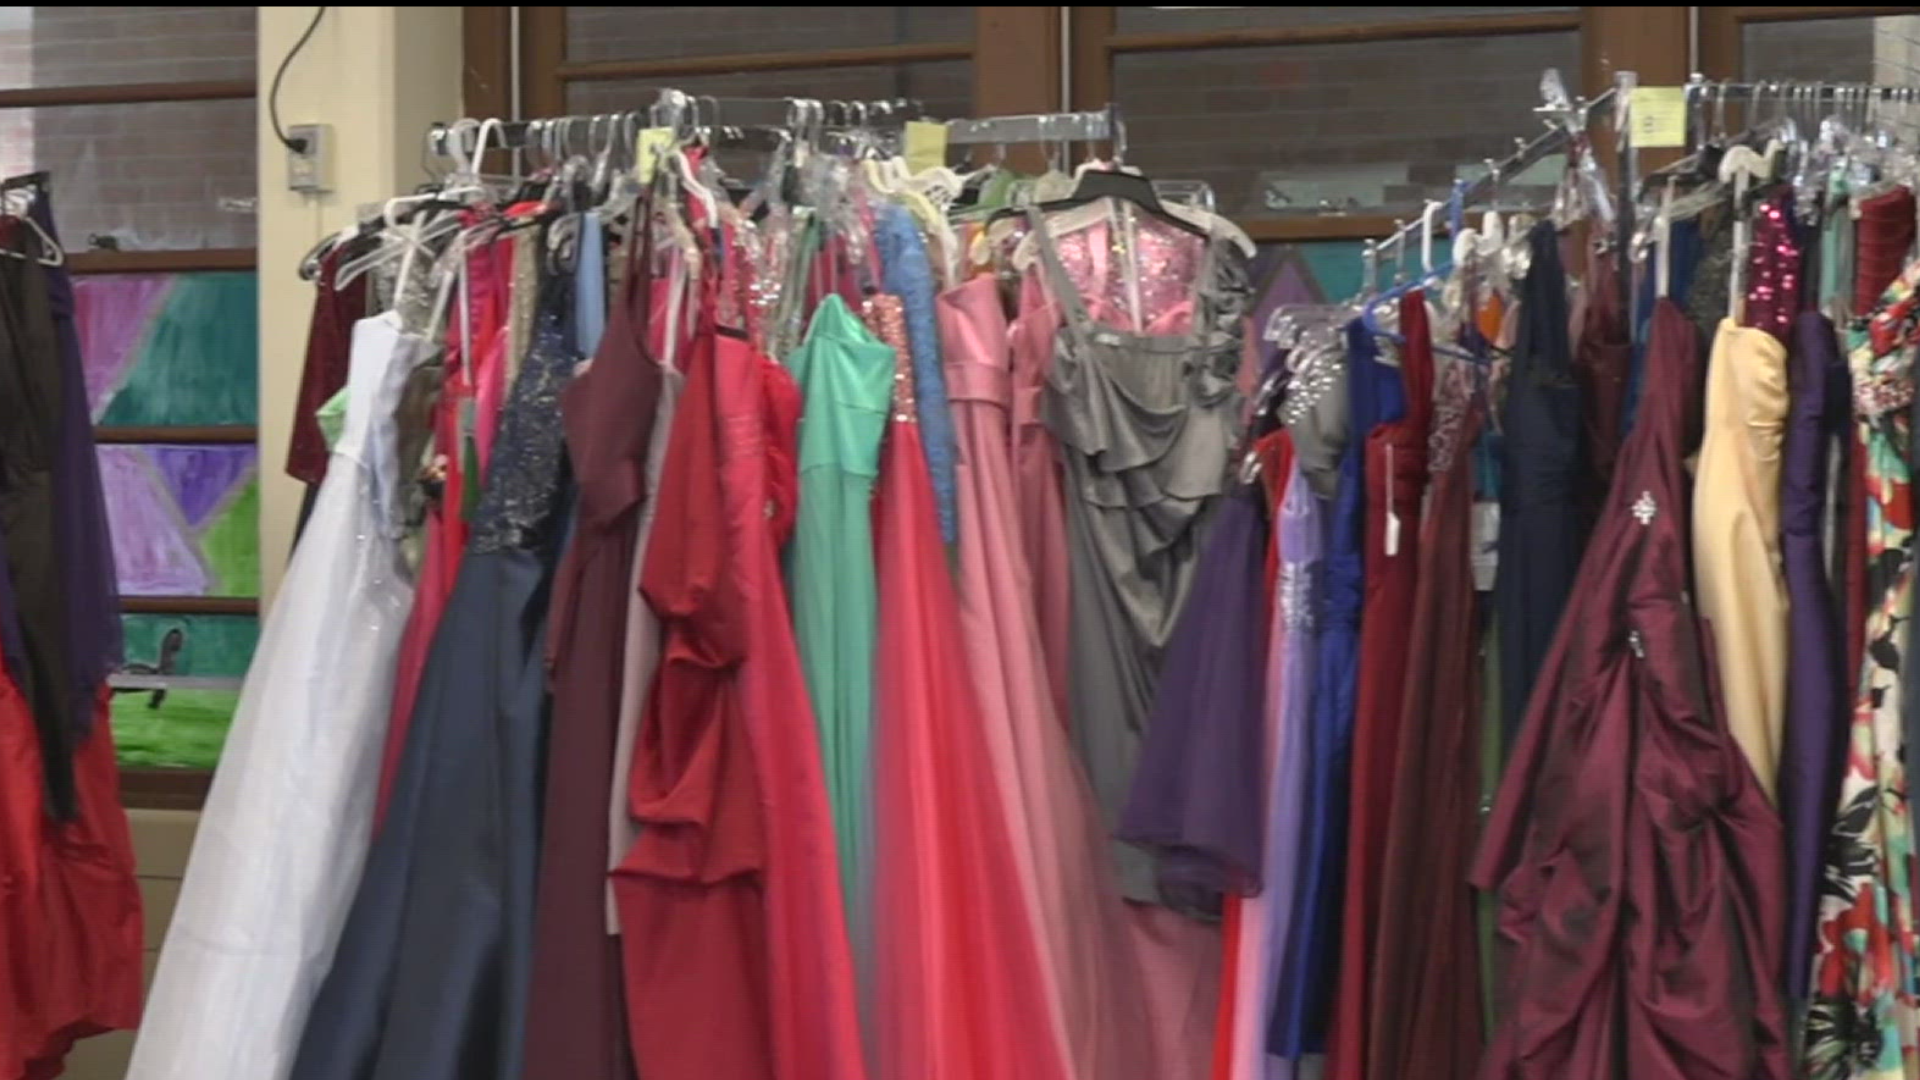 Caring Corner was stocked with dresses, tuxedos, ties, jewelry, shoes, and so much more for students searching for the perfect outfit for prom.